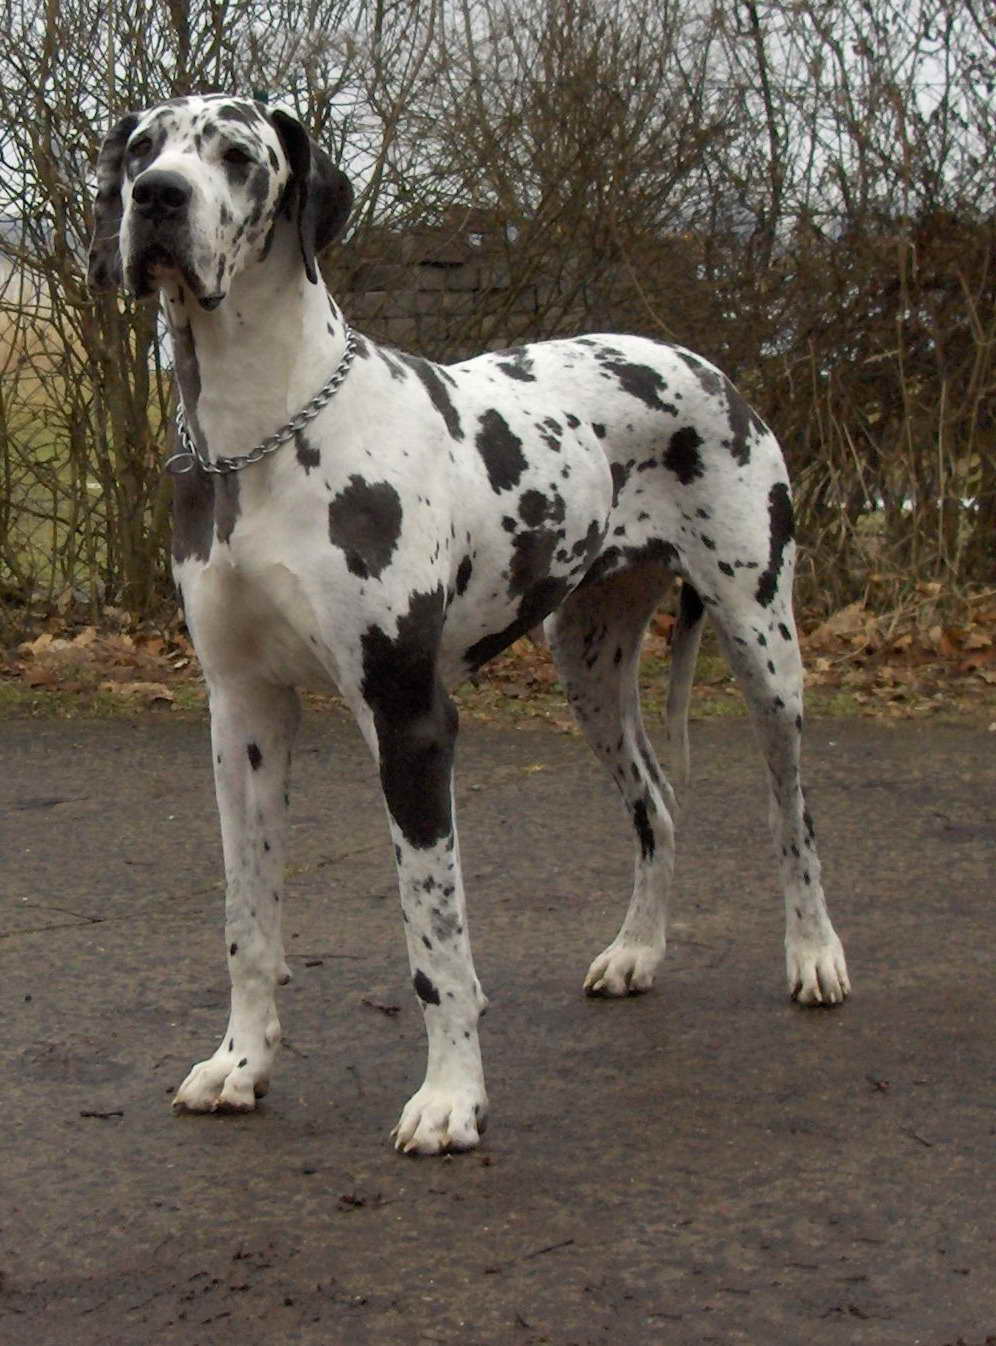 About Great Dane Dogs